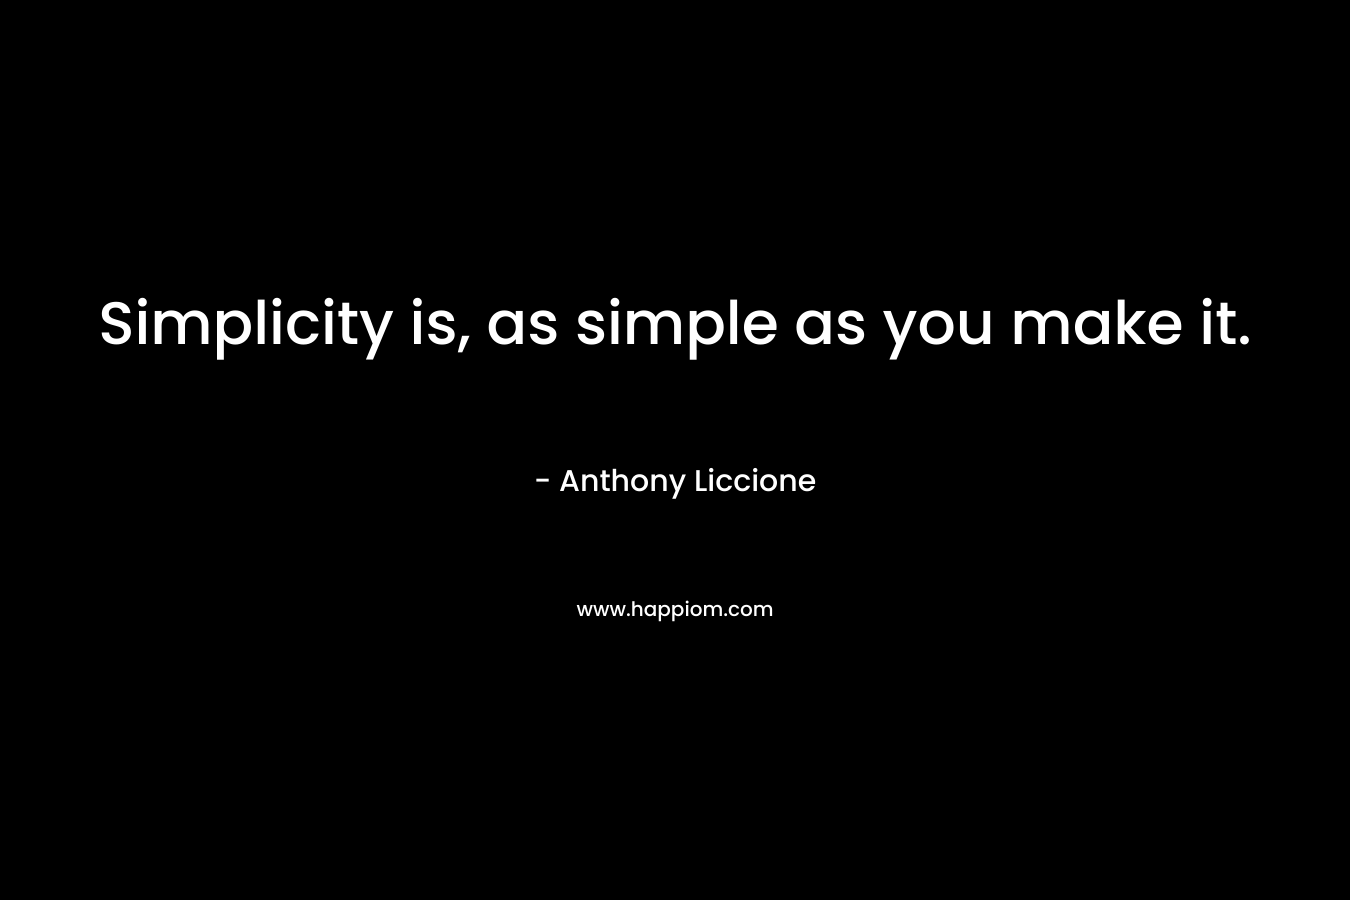 Simplicity is, as simple as you make it.